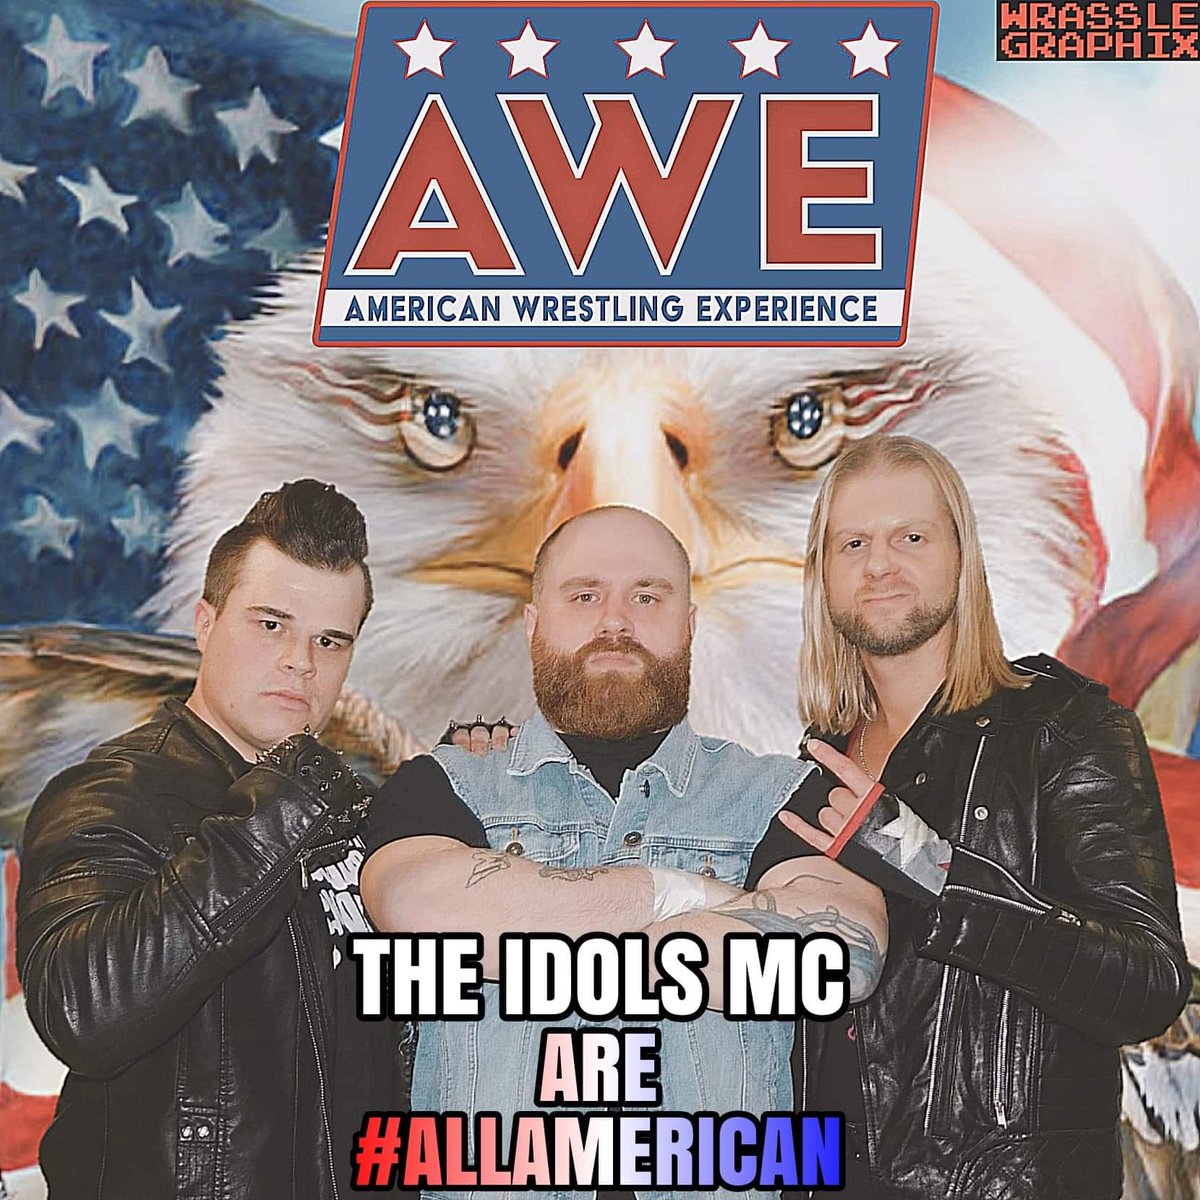 🇺🇸 The Idols MC are rolling into Jackson Michigan for their AWE debut!!!! They will be at AWE: SummerSlamboree!!! Happening Saturday July 23rd 2022 at the Polish National Alliance Hall (638 Page Ave.) In Jackson Michigan!!! Doors at 6:30pm Show at 7pm 🇺🇸 
fb.me/e/1XivTjiiv